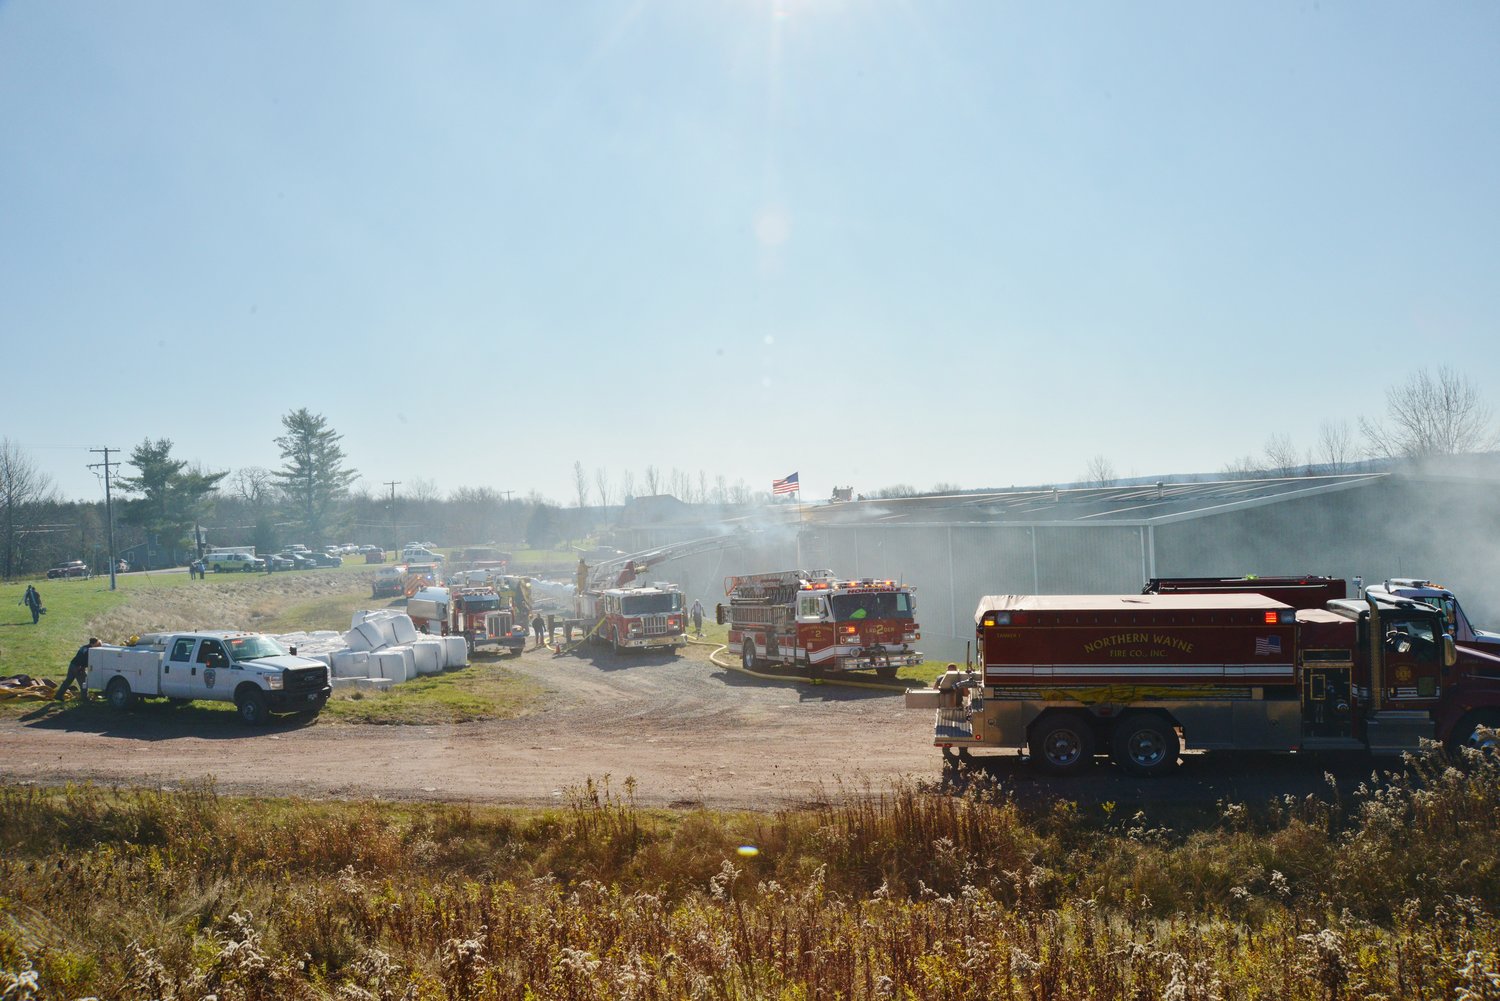 Numerous firetrucks responded to the fire at a hemp processing facility in northern Wayne County.